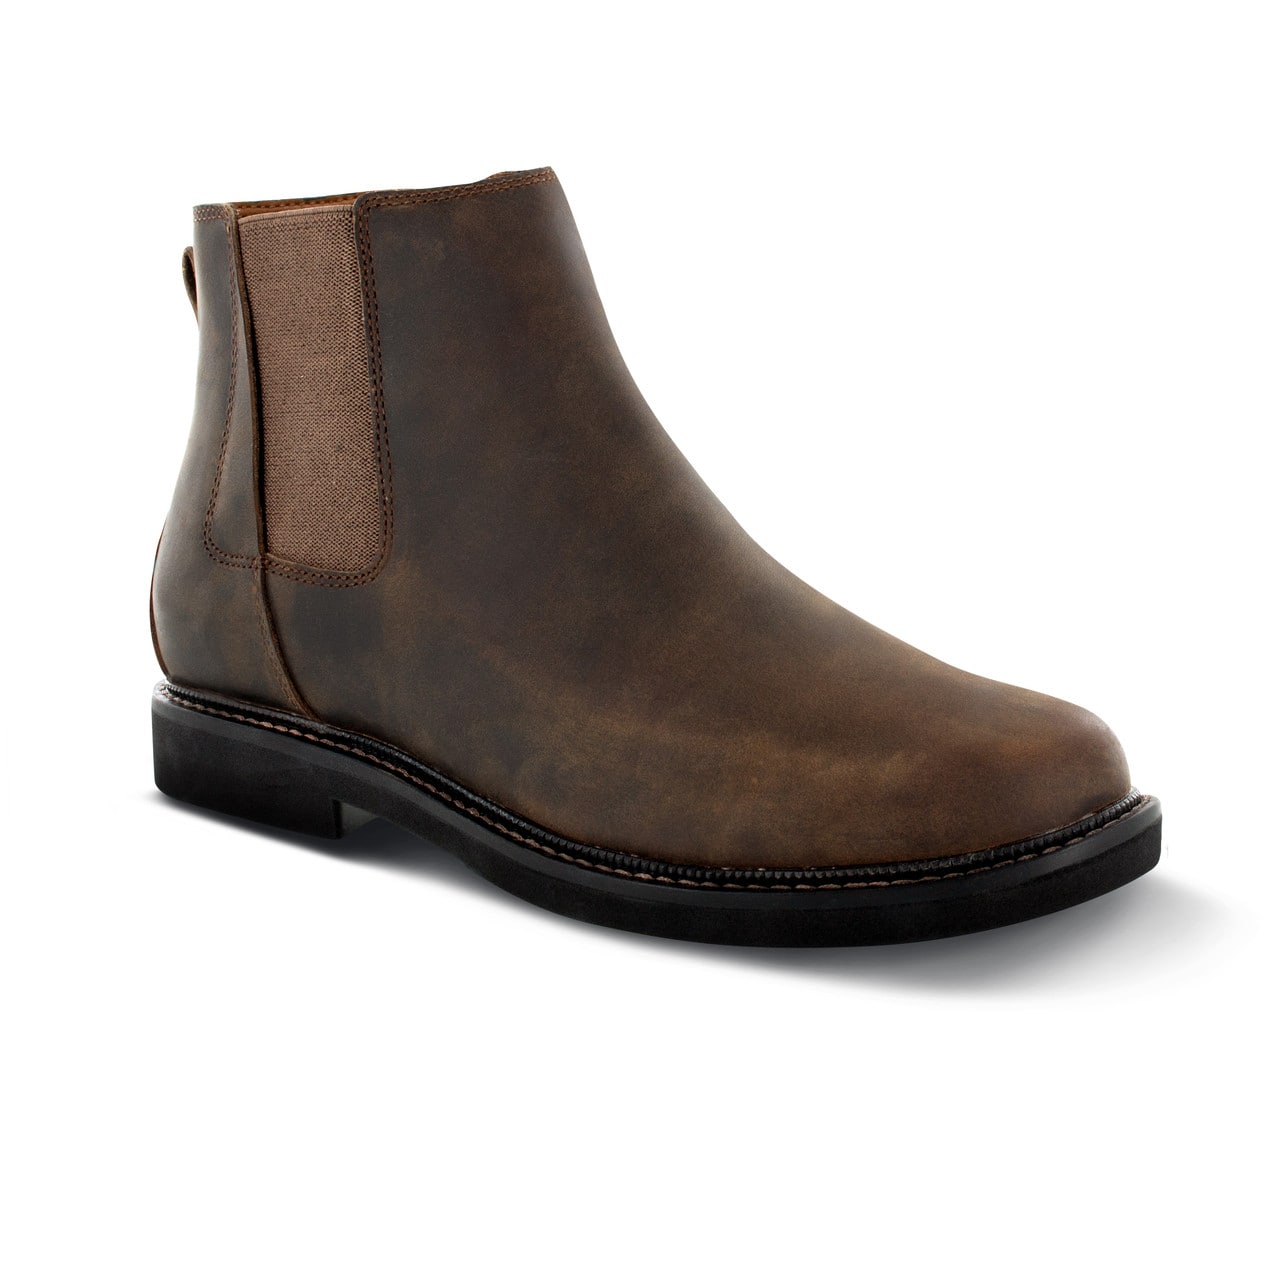 Apex Logan Chelsea Boots with 1/4” depth